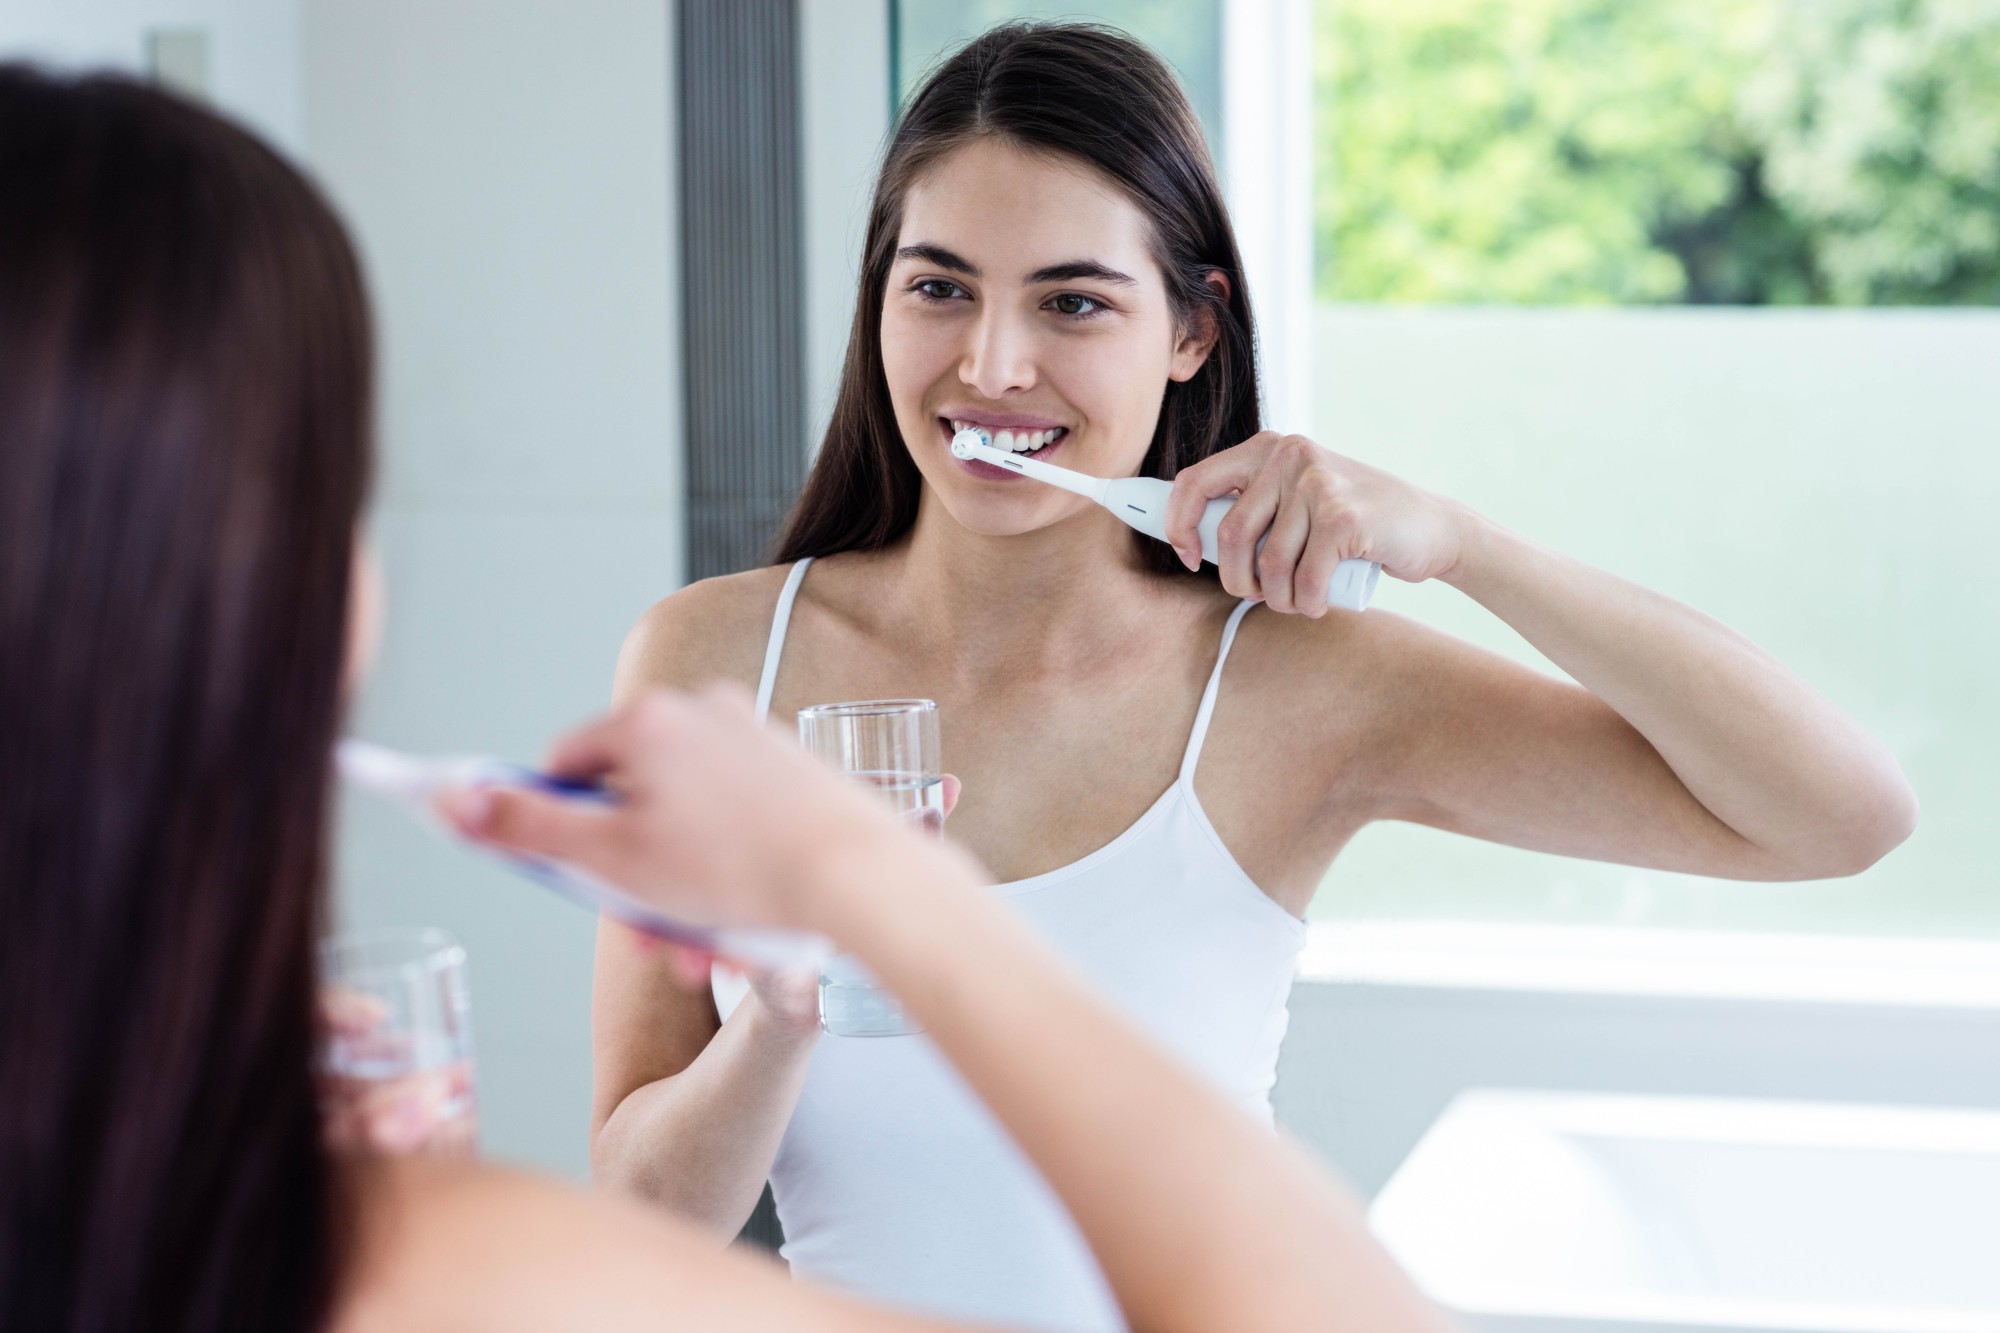 Are you wondering how to establish a good teeth care routine? Read on to find out the basics and why it's important to have one in place.